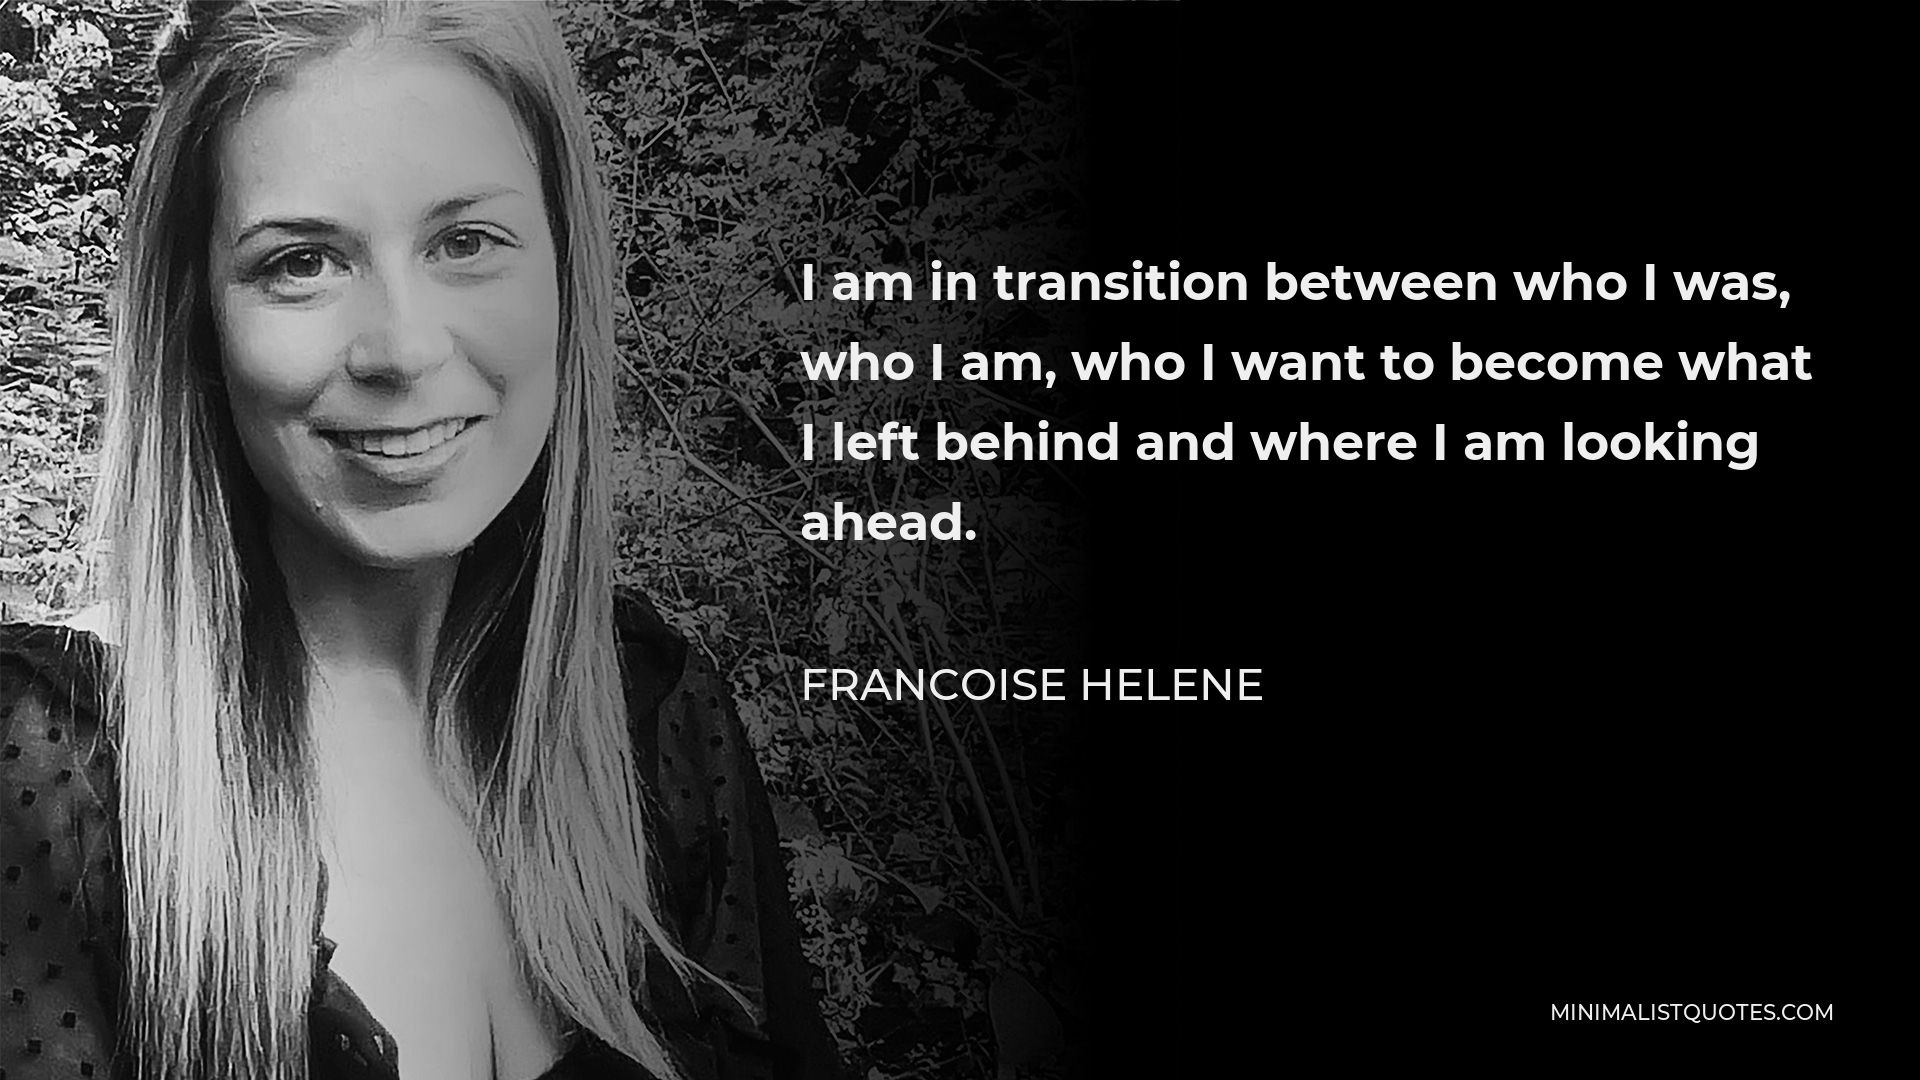 Francoise Helene Quote - I am in transition between who I was, who I am, who I want to become what I left behind and where I am looking ahead.